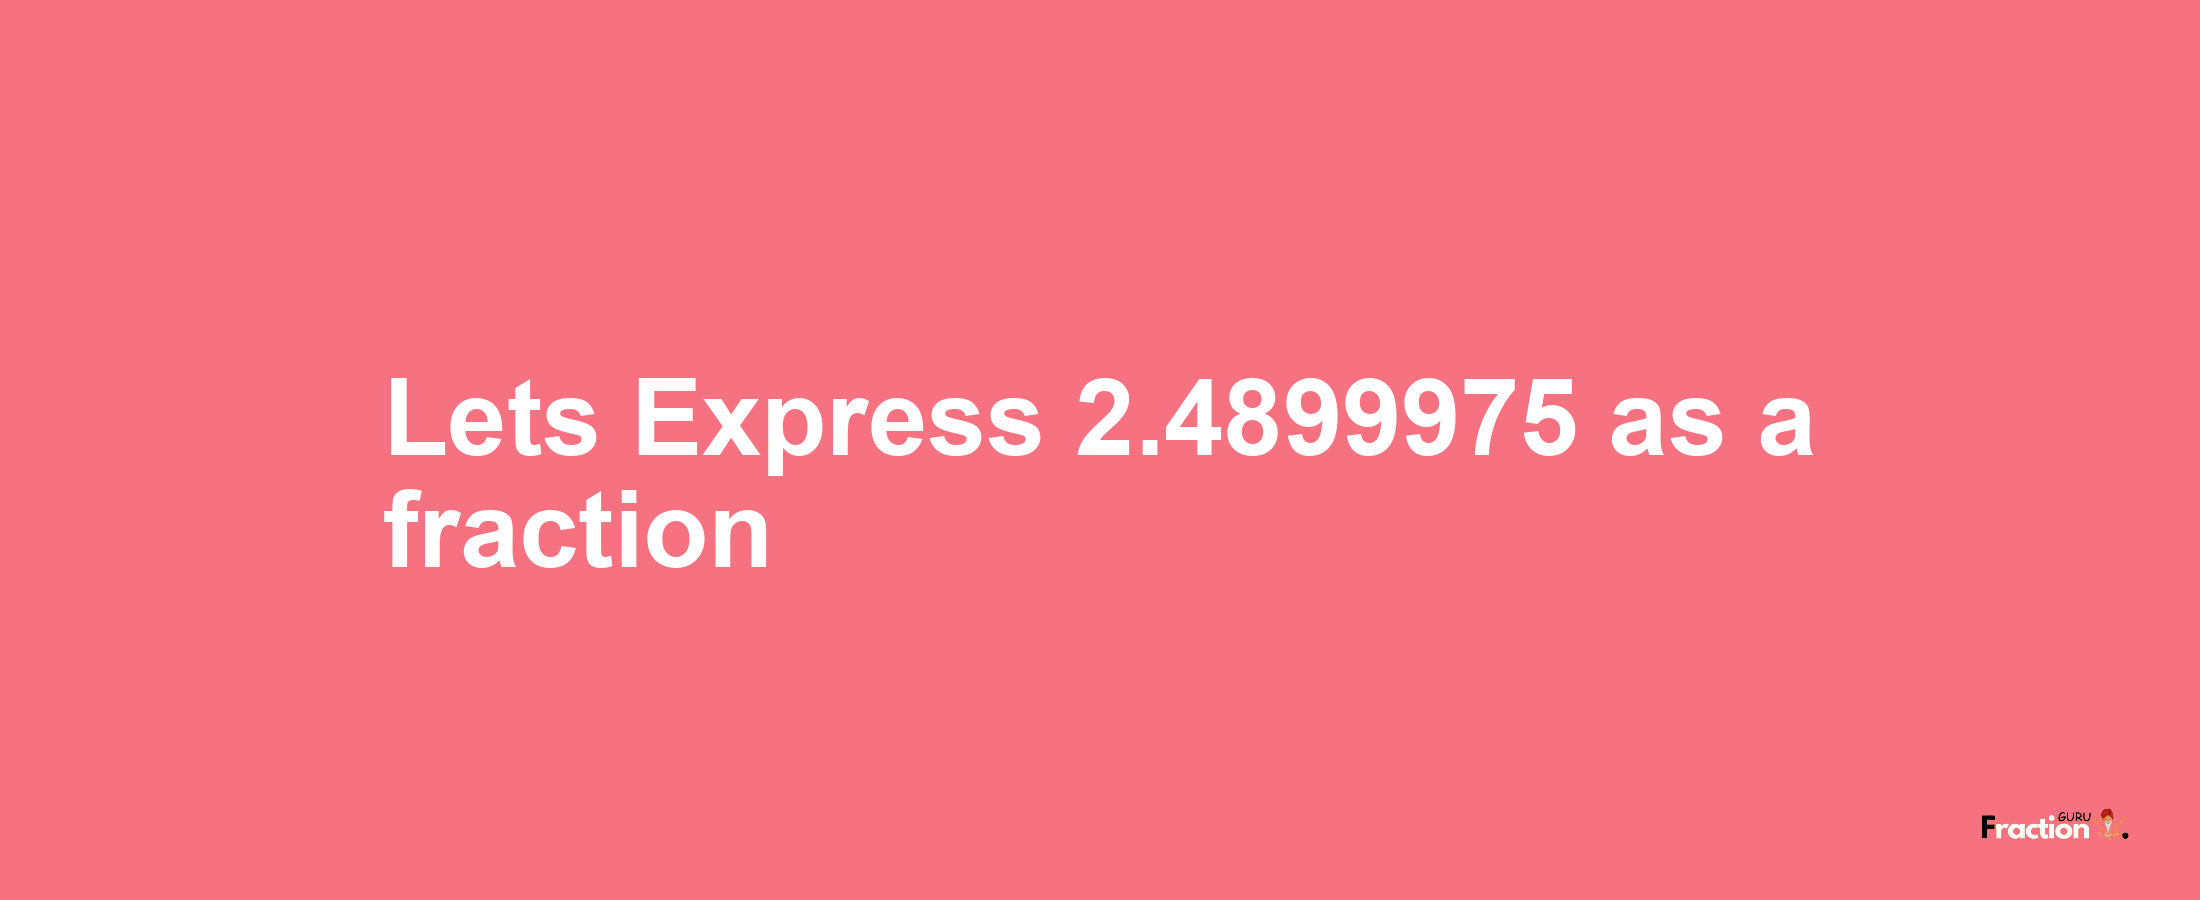 Lets Express 2.4899975 as afraction